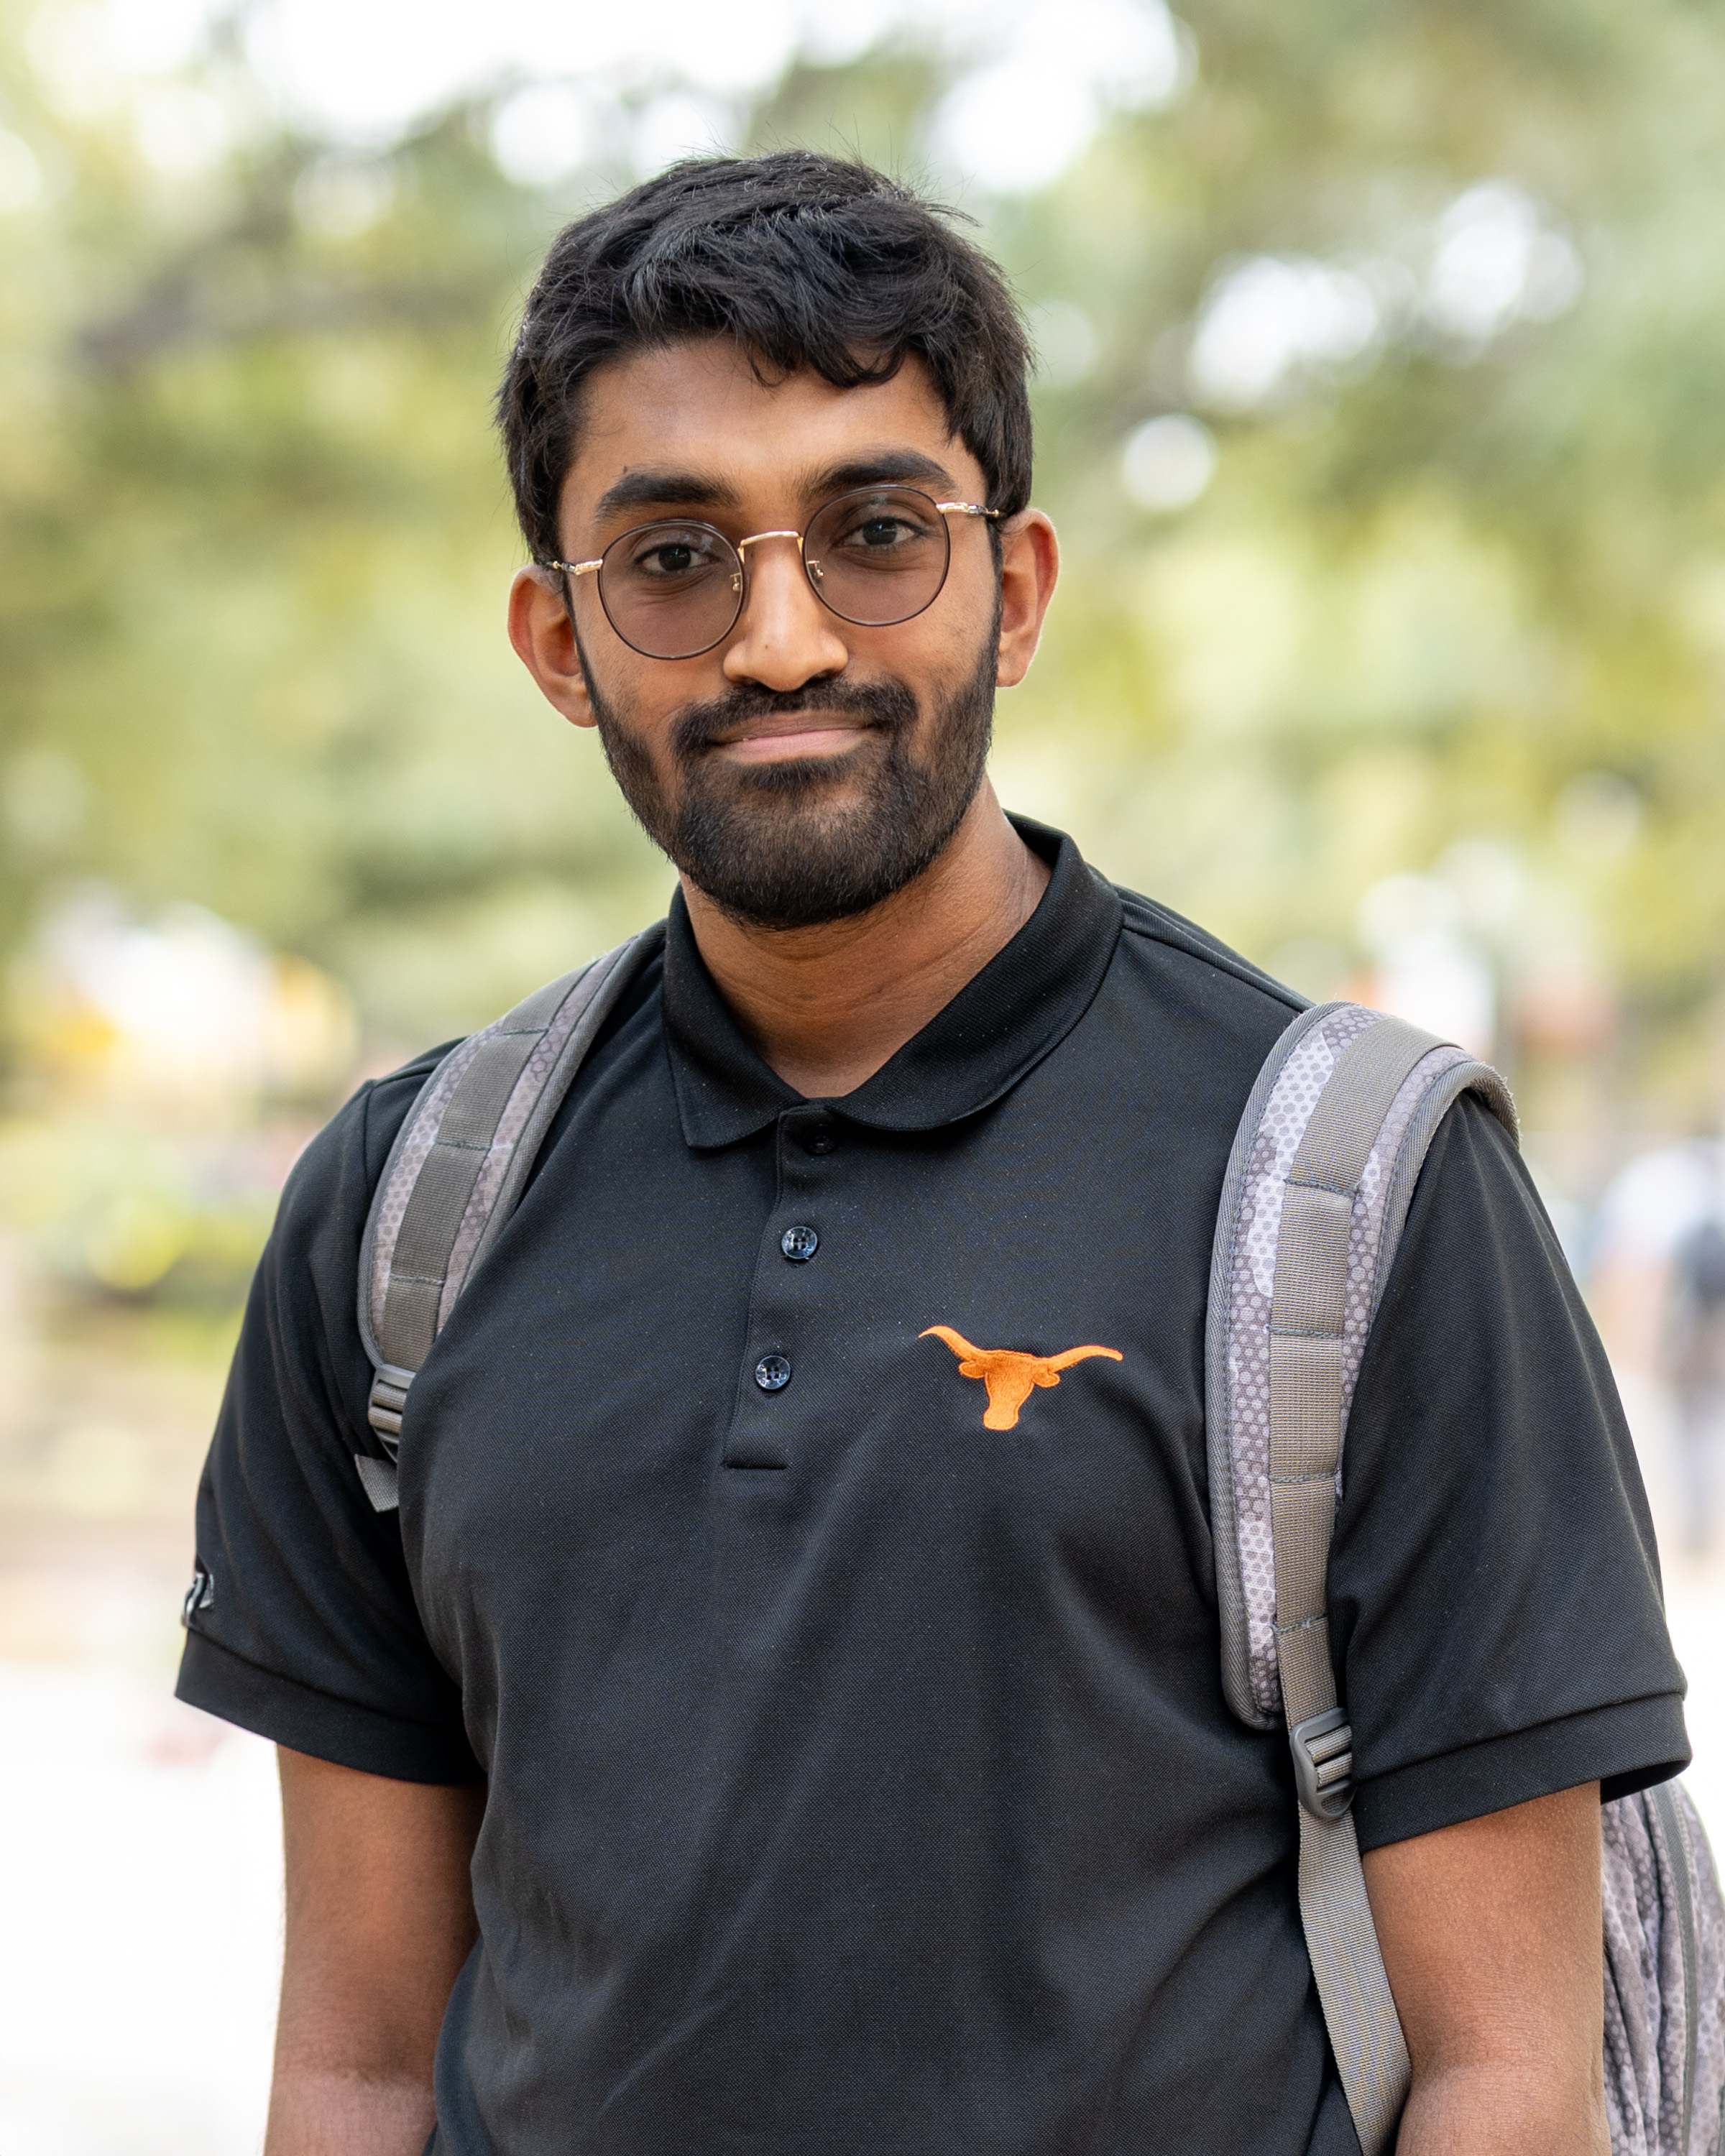 A bearded young man wears a backpack and polo shirt with the longhorn silhouette.